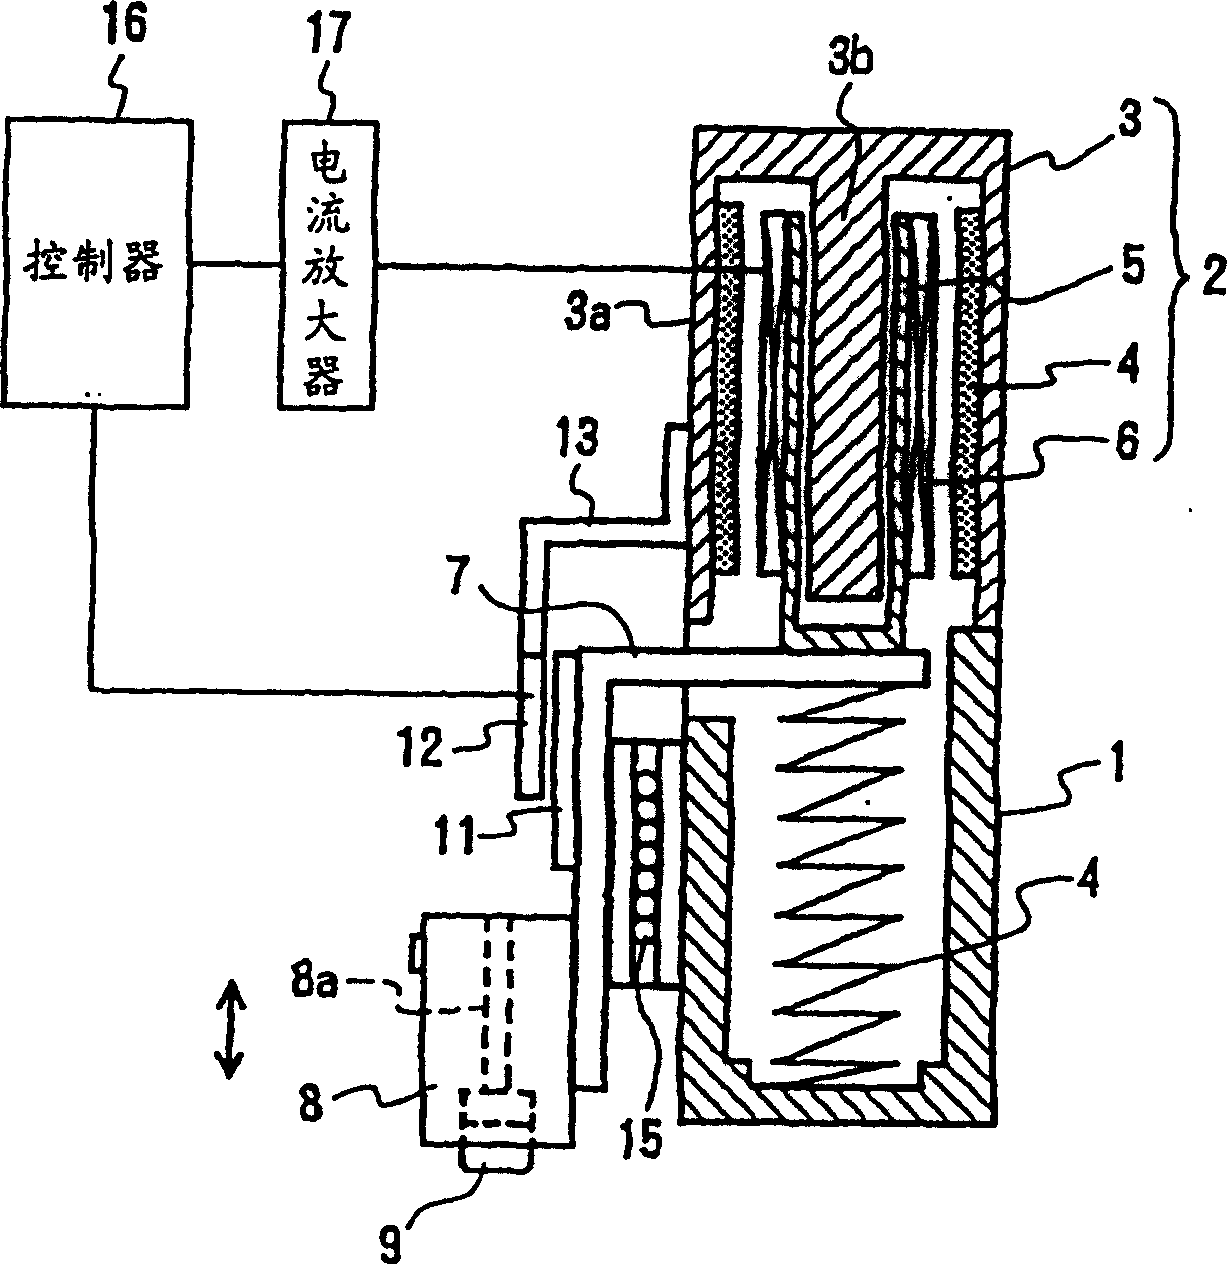 Load control type exciter